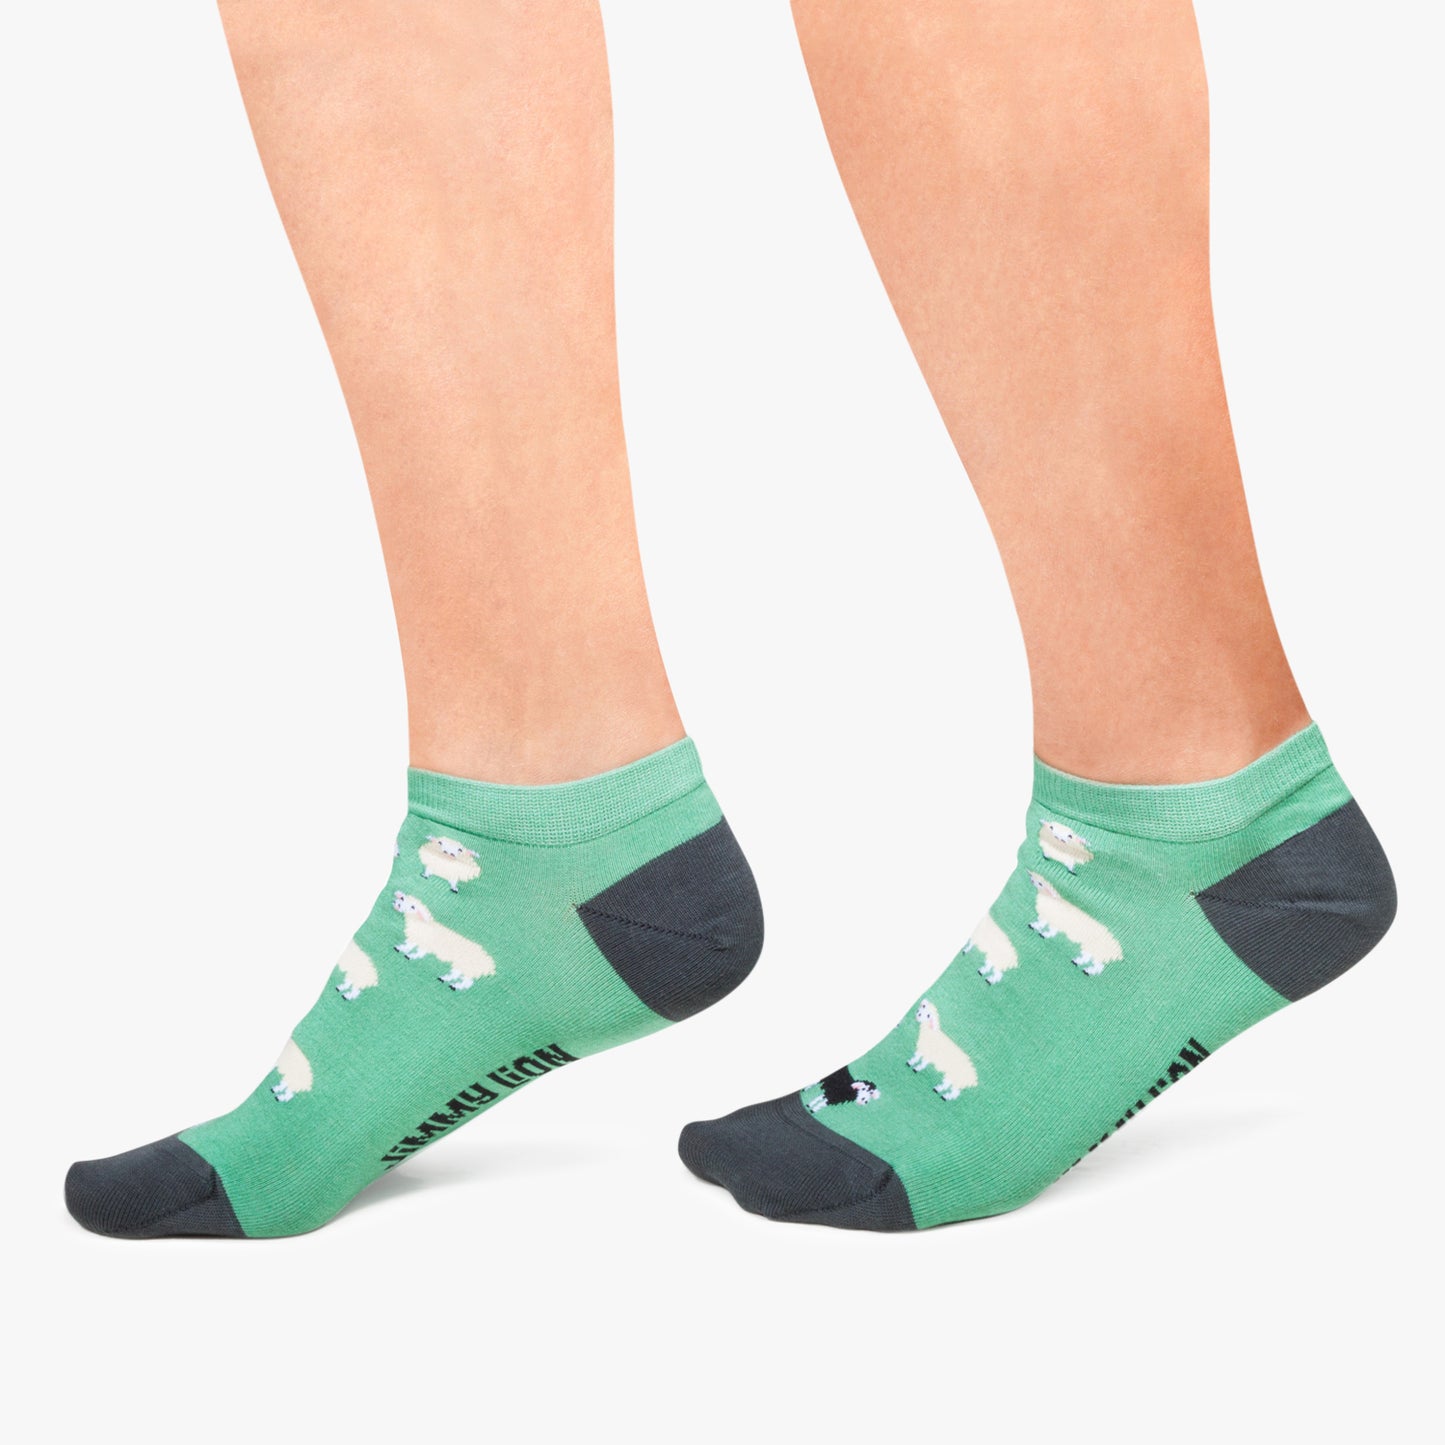 Ankle Black Sheep - Turquoise (2)